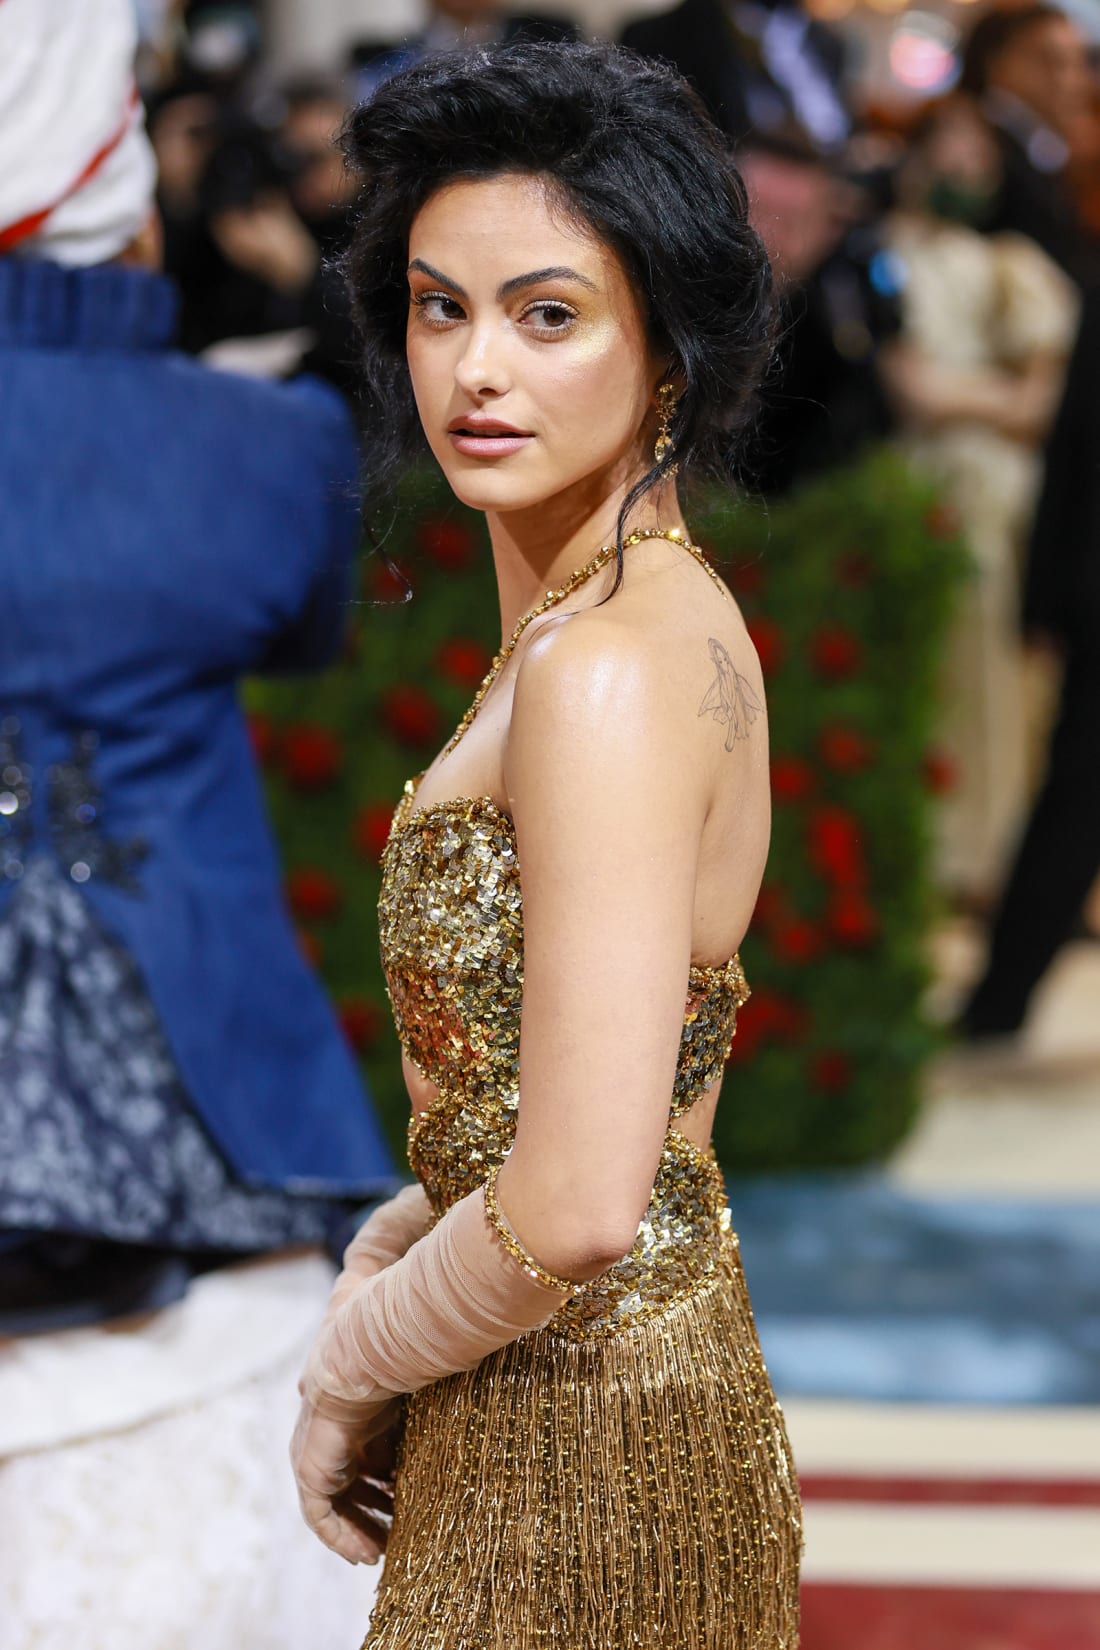 Camila Mendes opted for a fringed gold dress with sequined top and cut-out.